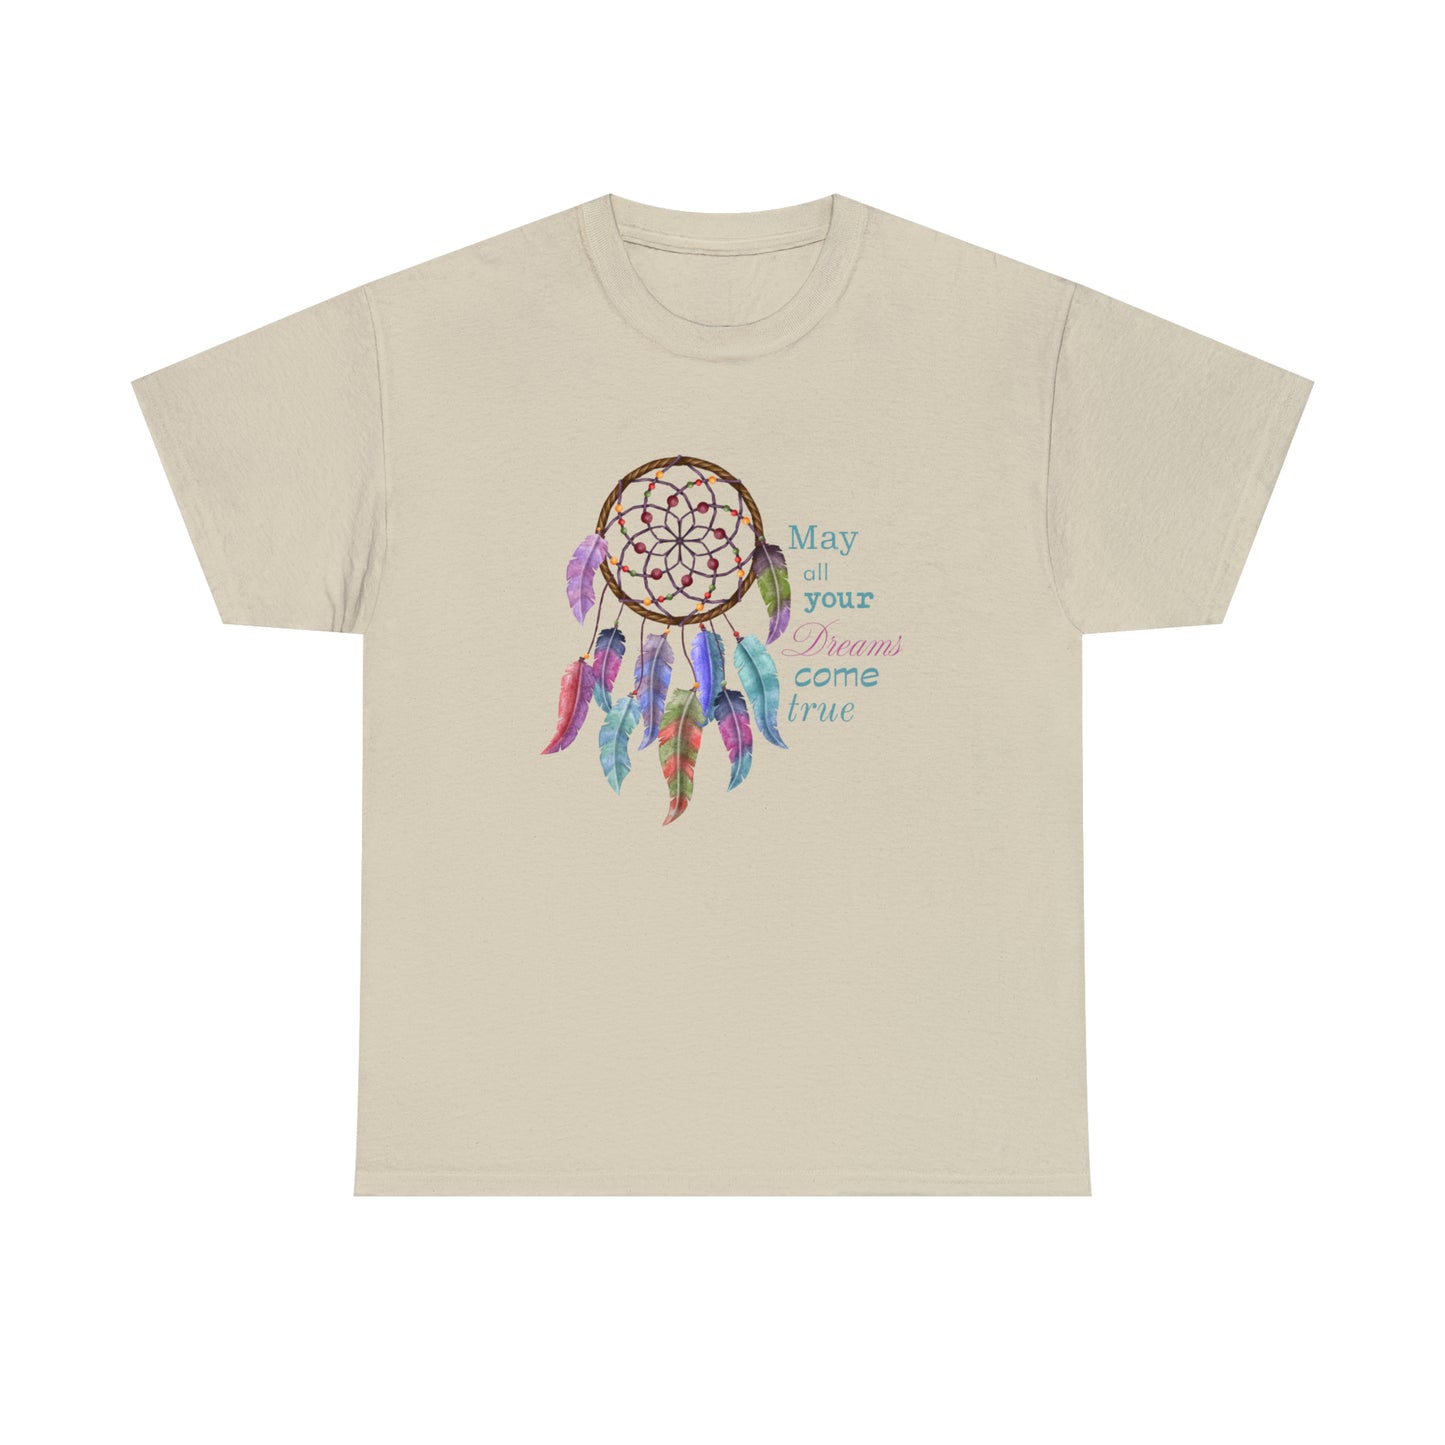 Dreamcatcher T-Shirt For May All Your Dreams Come True TShirt For Motivational T Shirt For Positive Shirt For Spiritual Shirt For Woman